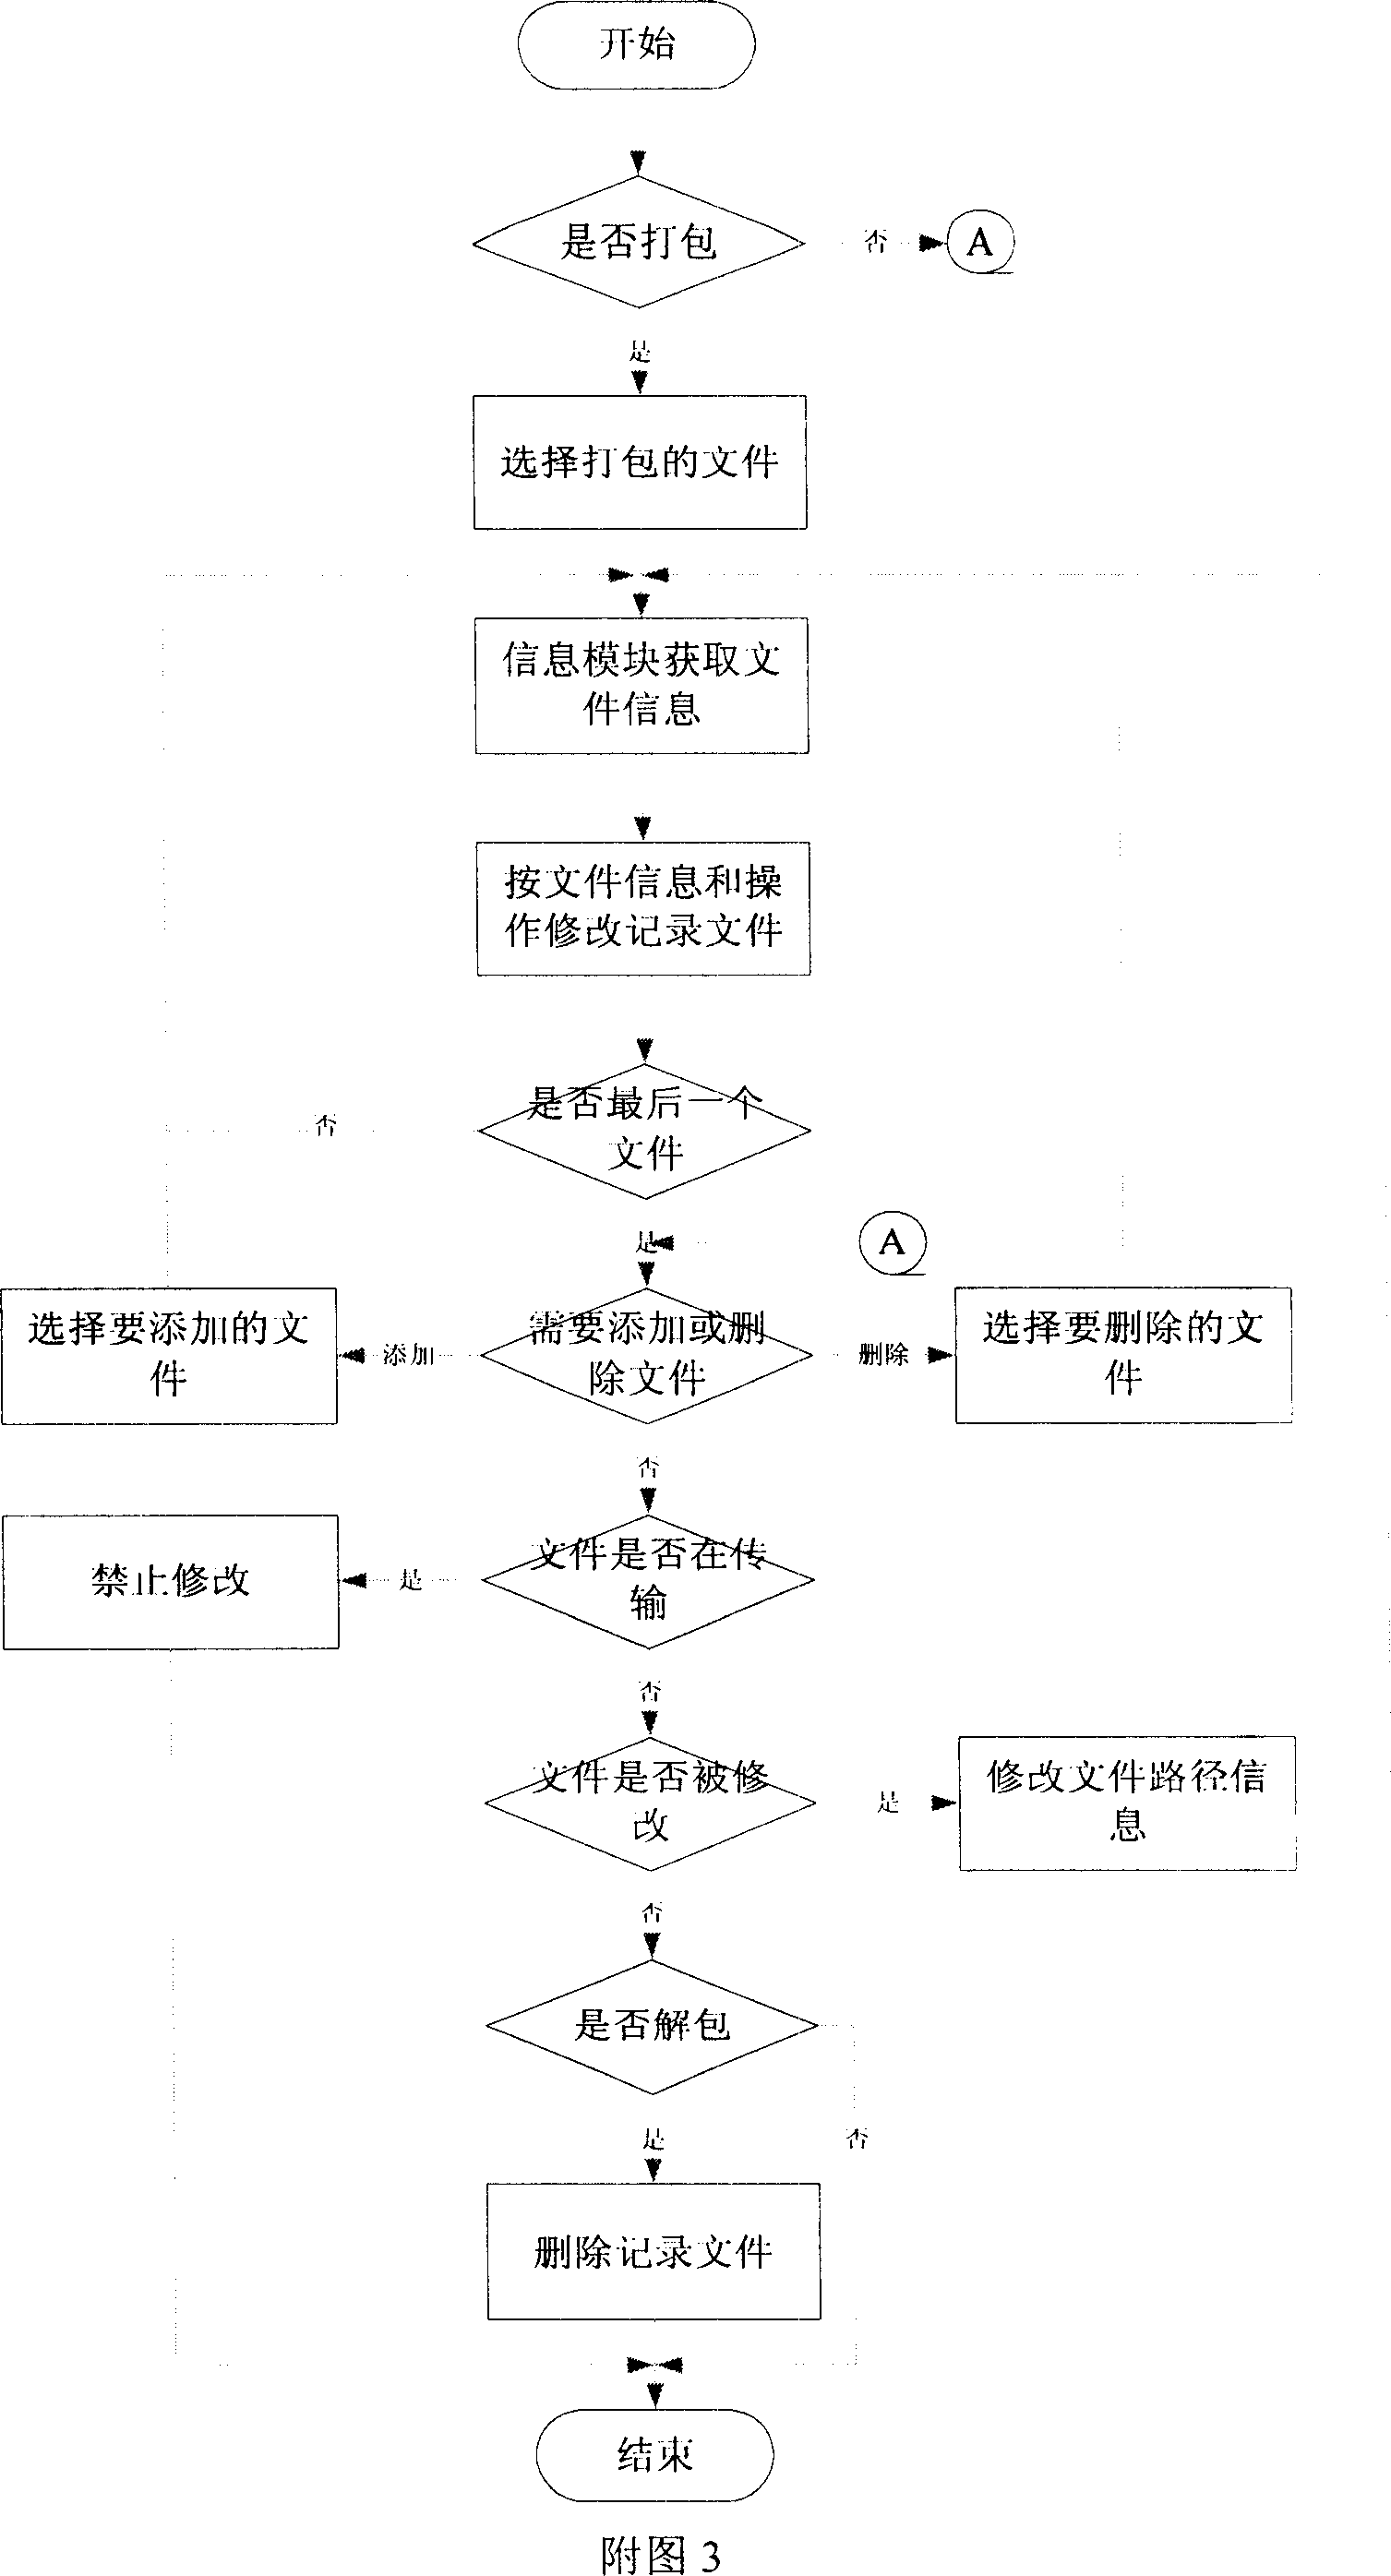 File packing and unpacking method for communication transmission